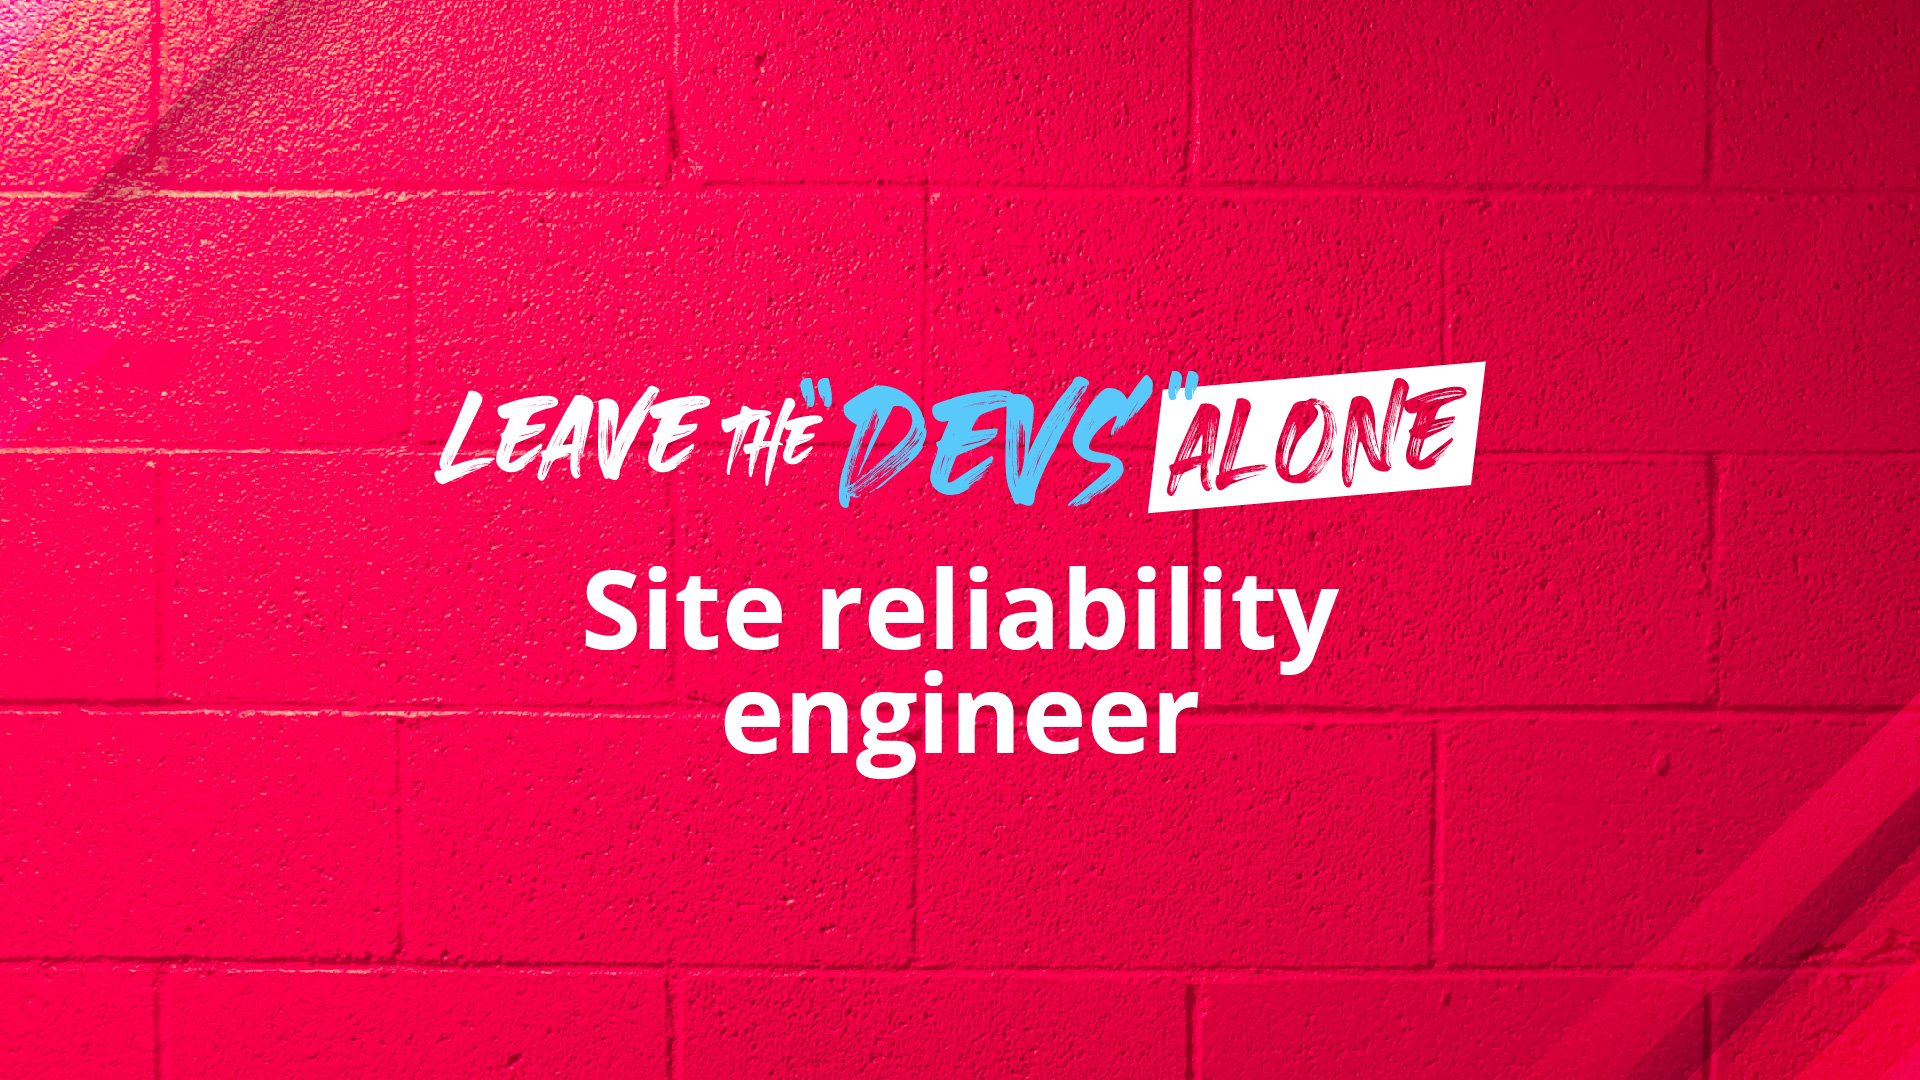 Site reliability engineer: these are his/her main responsibilities